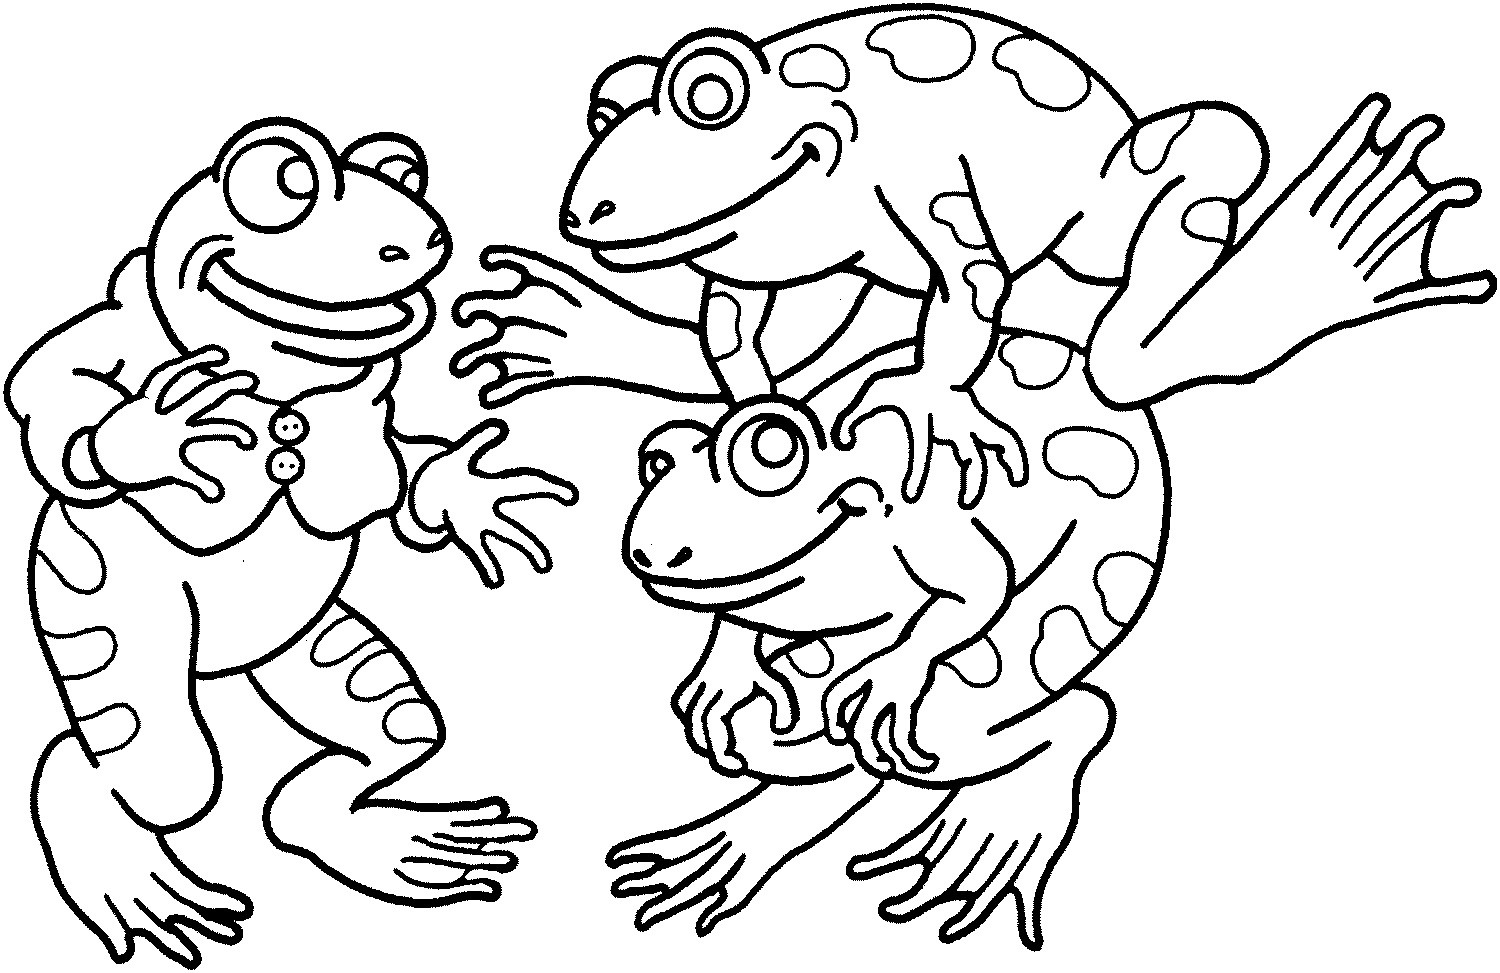 Frog Coloring Pages For Kids
 Frog Drawing For Kids at GetDrawings